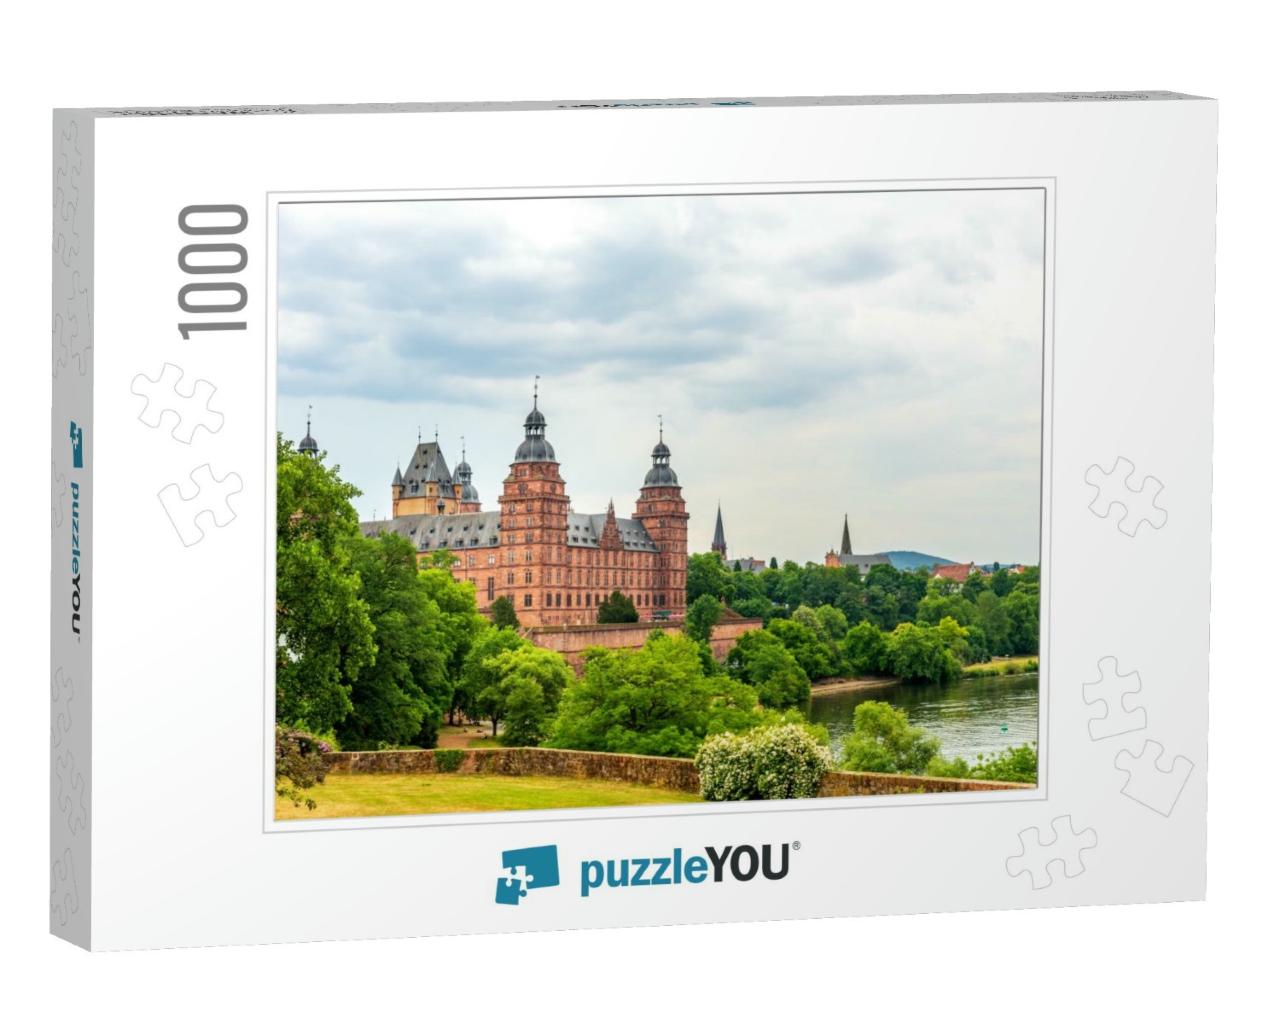 View to Castle Johannesburg, Aschaffenburg, Germany... Jigsaw Puzzle with 1000 pieces